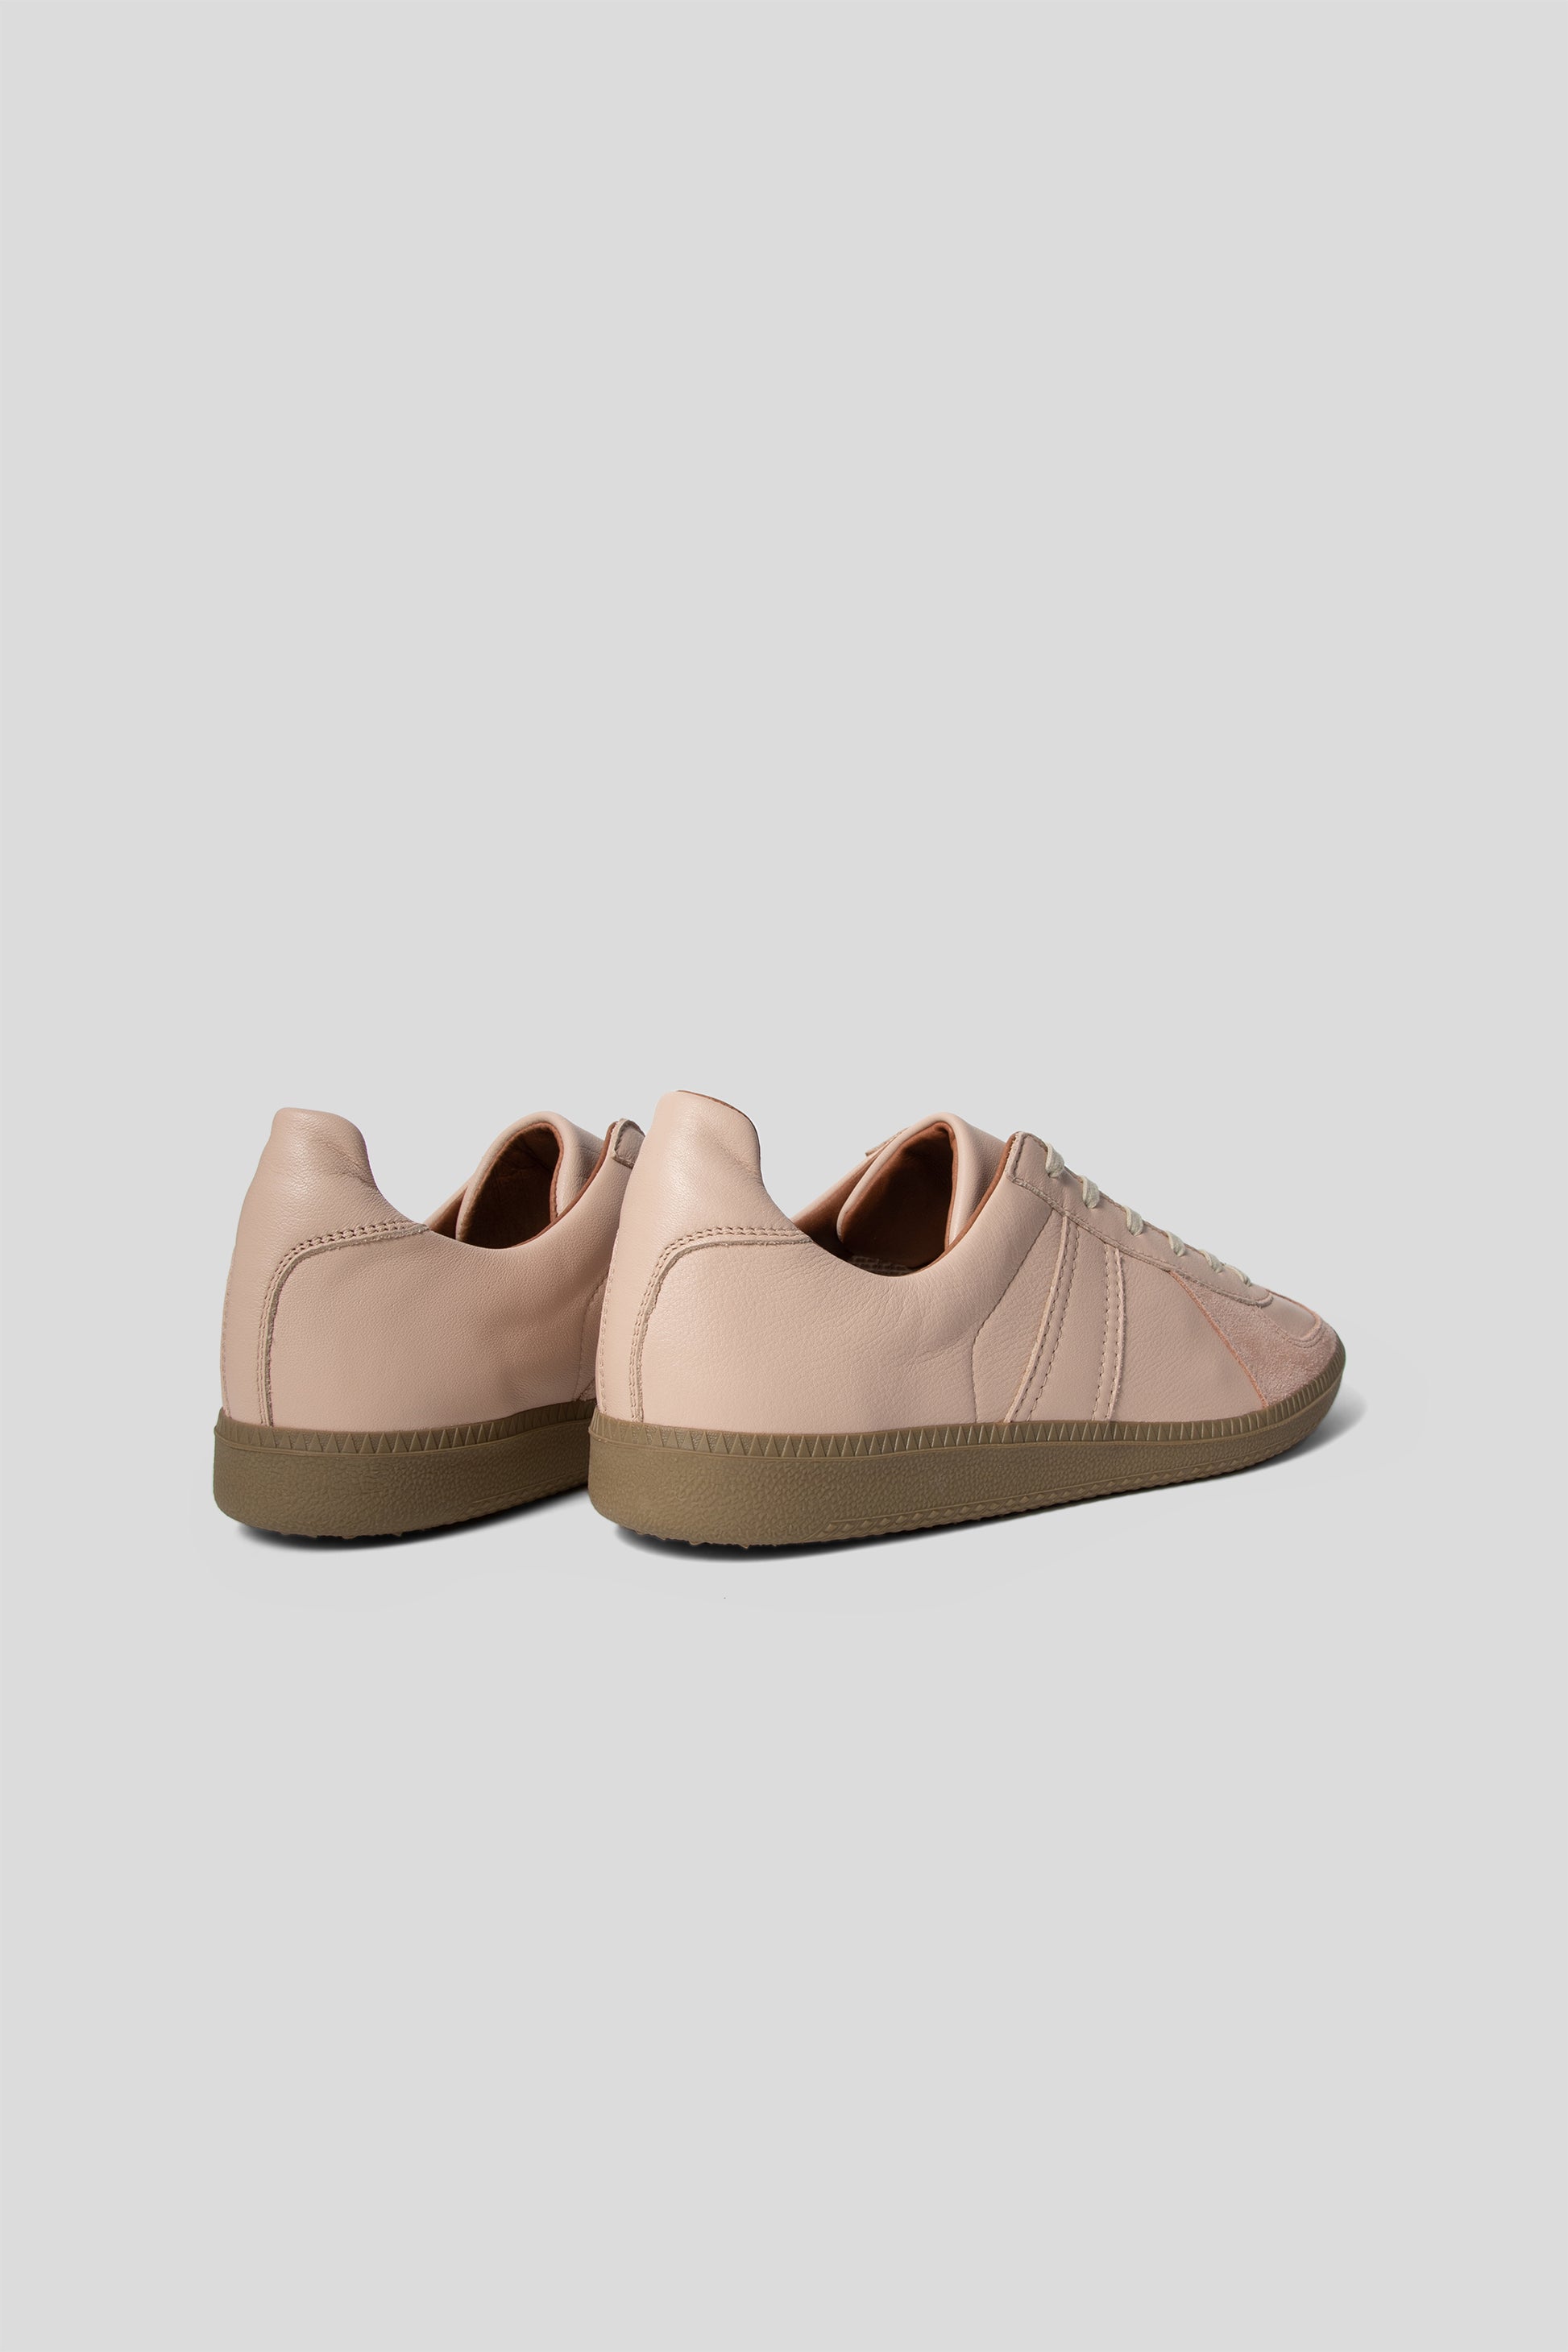 Reproduction of Found German Military Trainer Shoe in Nude